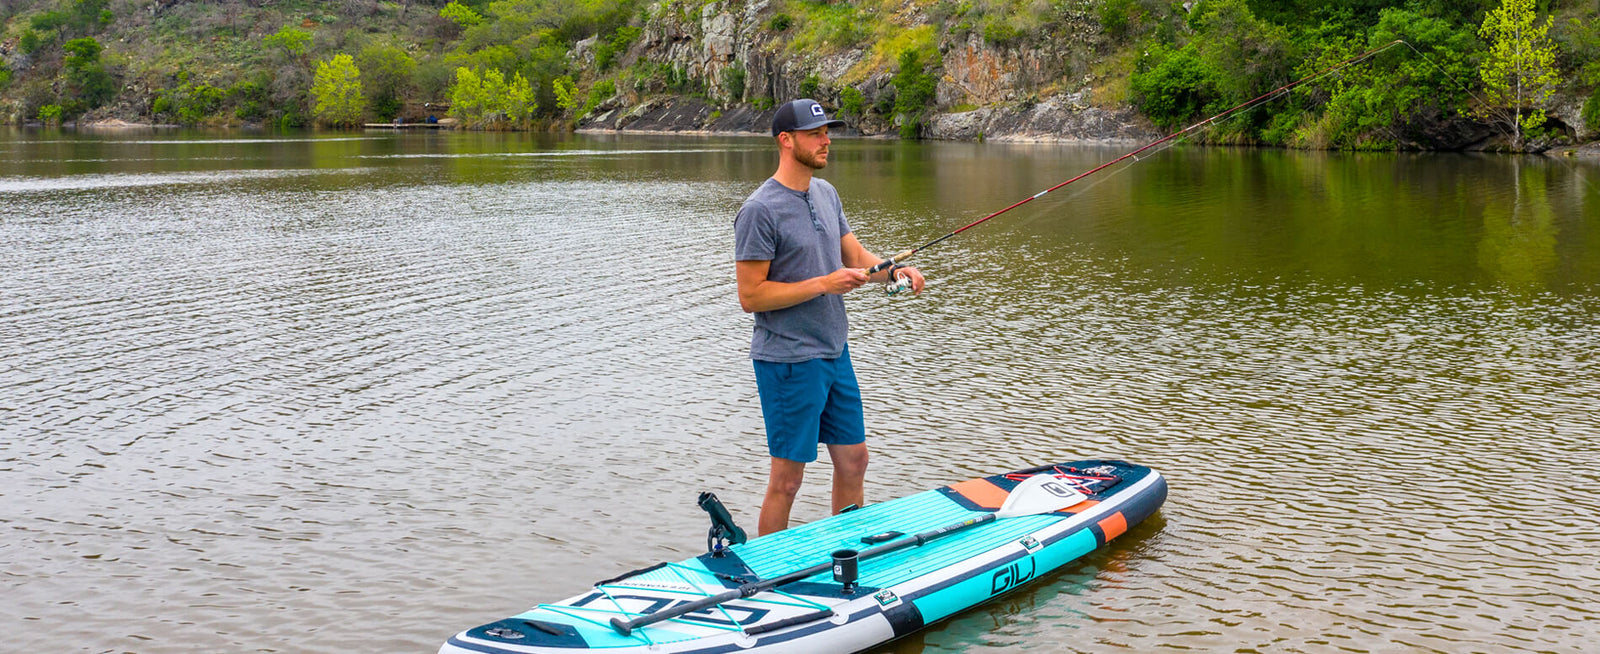 How To Fish From A Paddleboard - Inshore Flats Edition [Video]